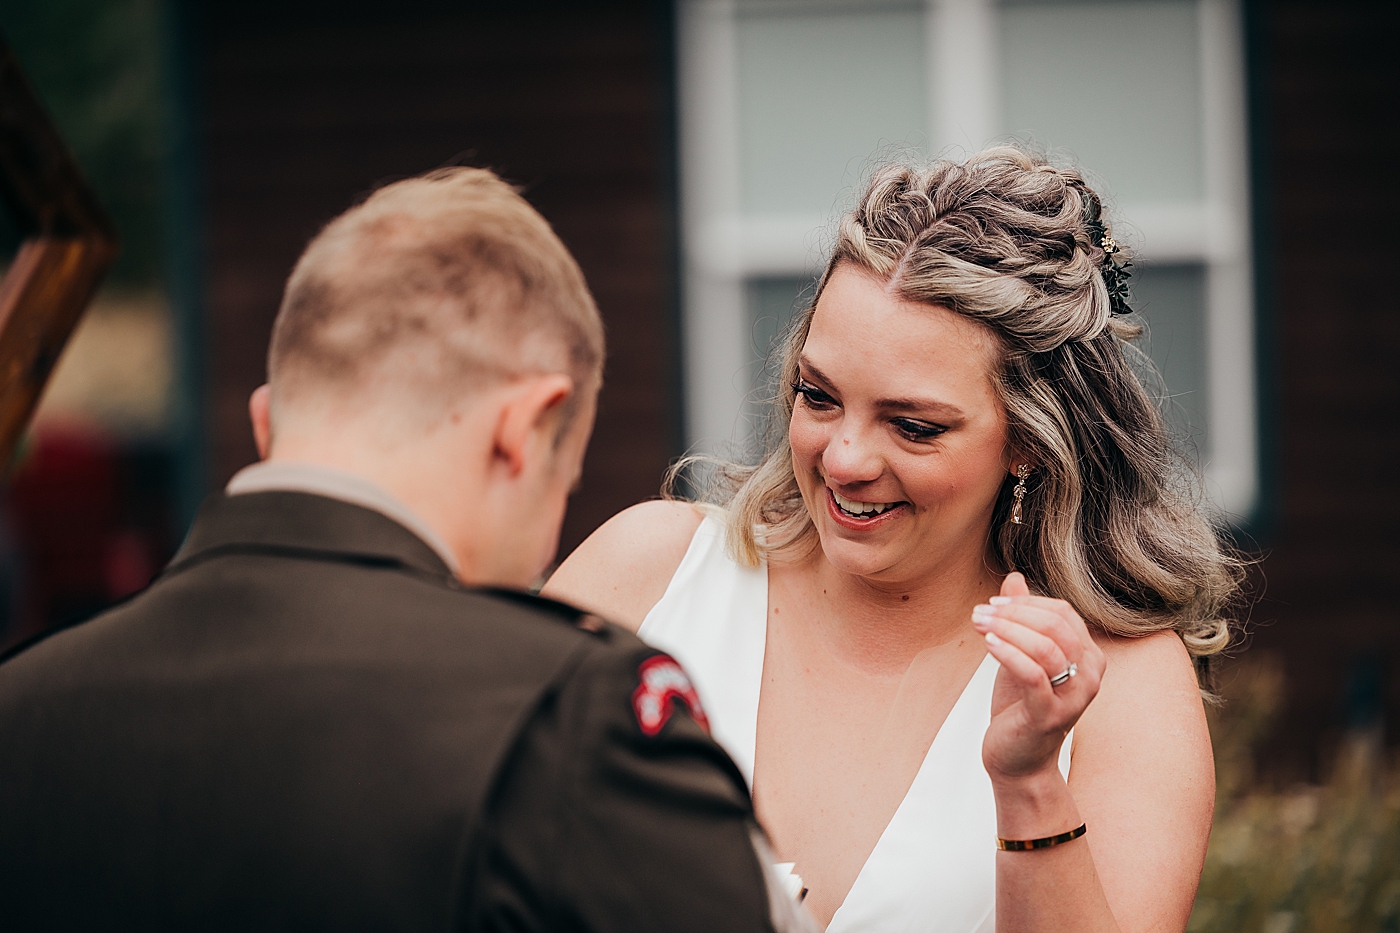 Bride laughing during vows. Photo by Megan Montalvo Photography.